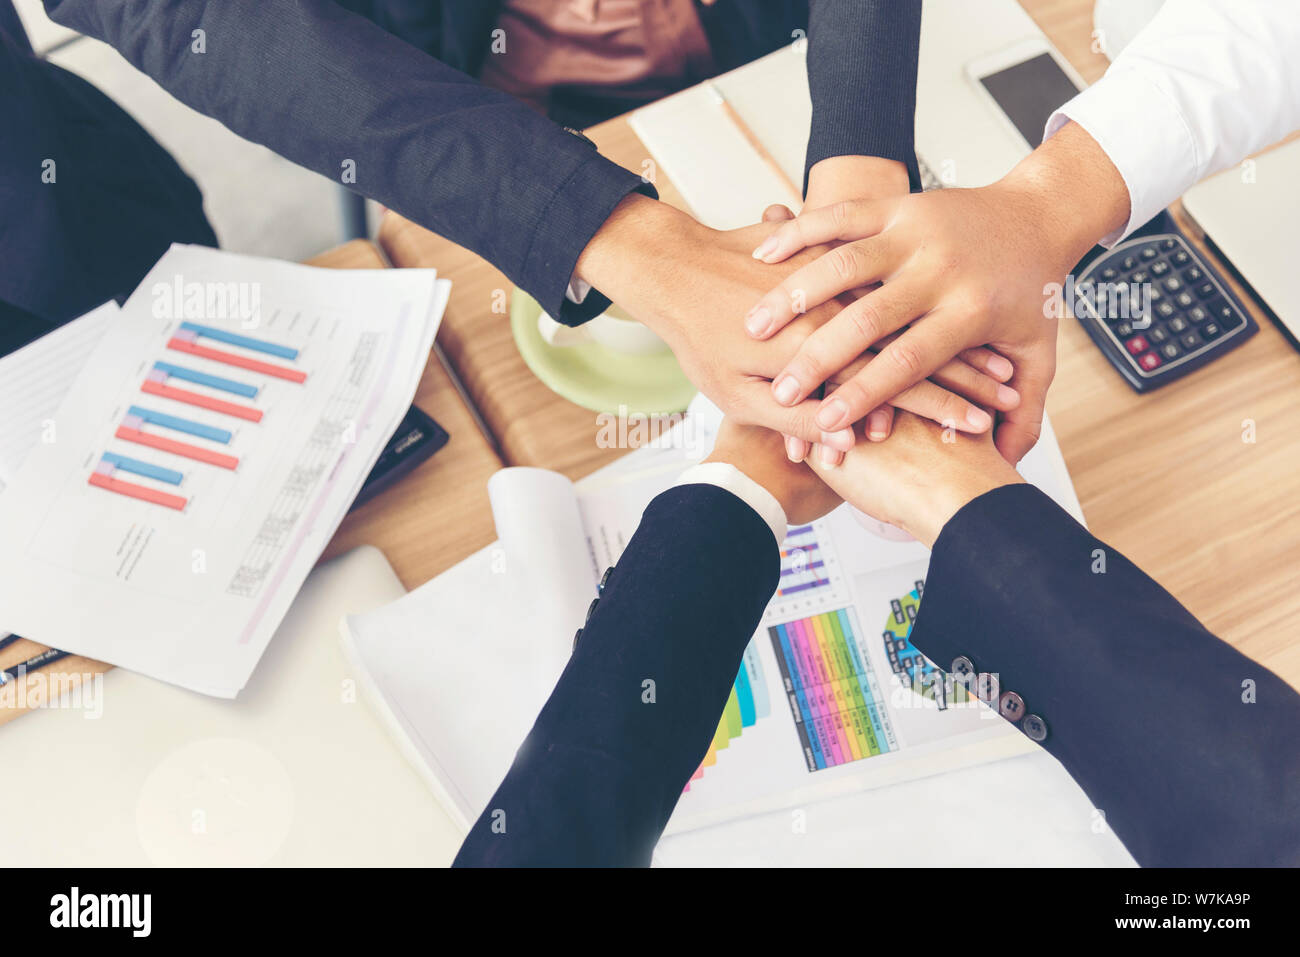 Teamwork Concept. Group of young businessman teamwork touching shaking hands together. Stock Photo